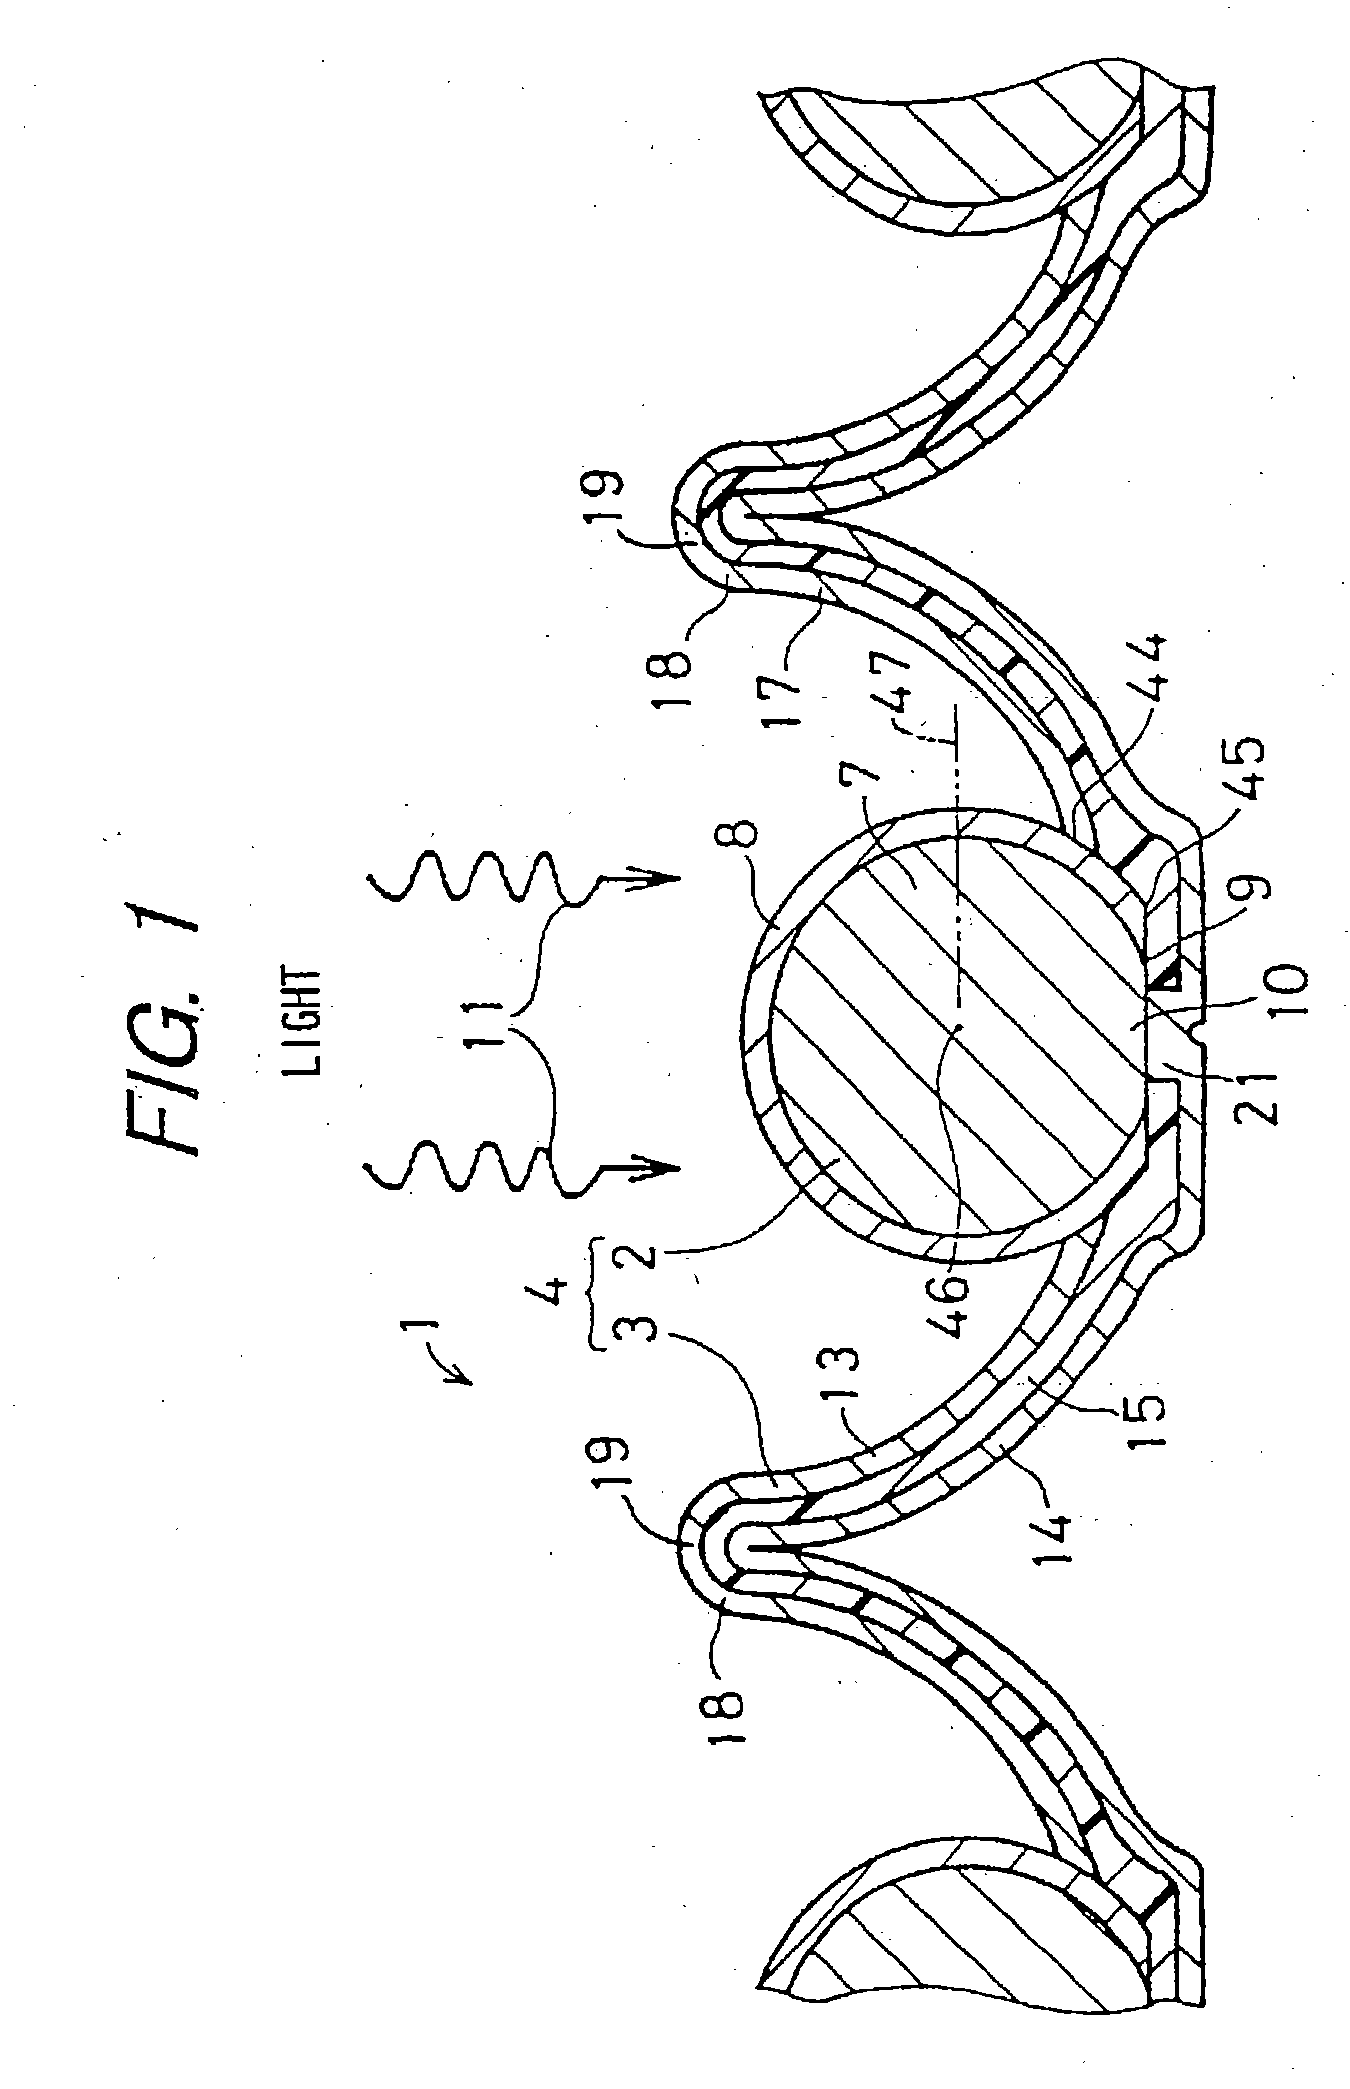 Photovoltaic apparatus including spherical semiconducting particles